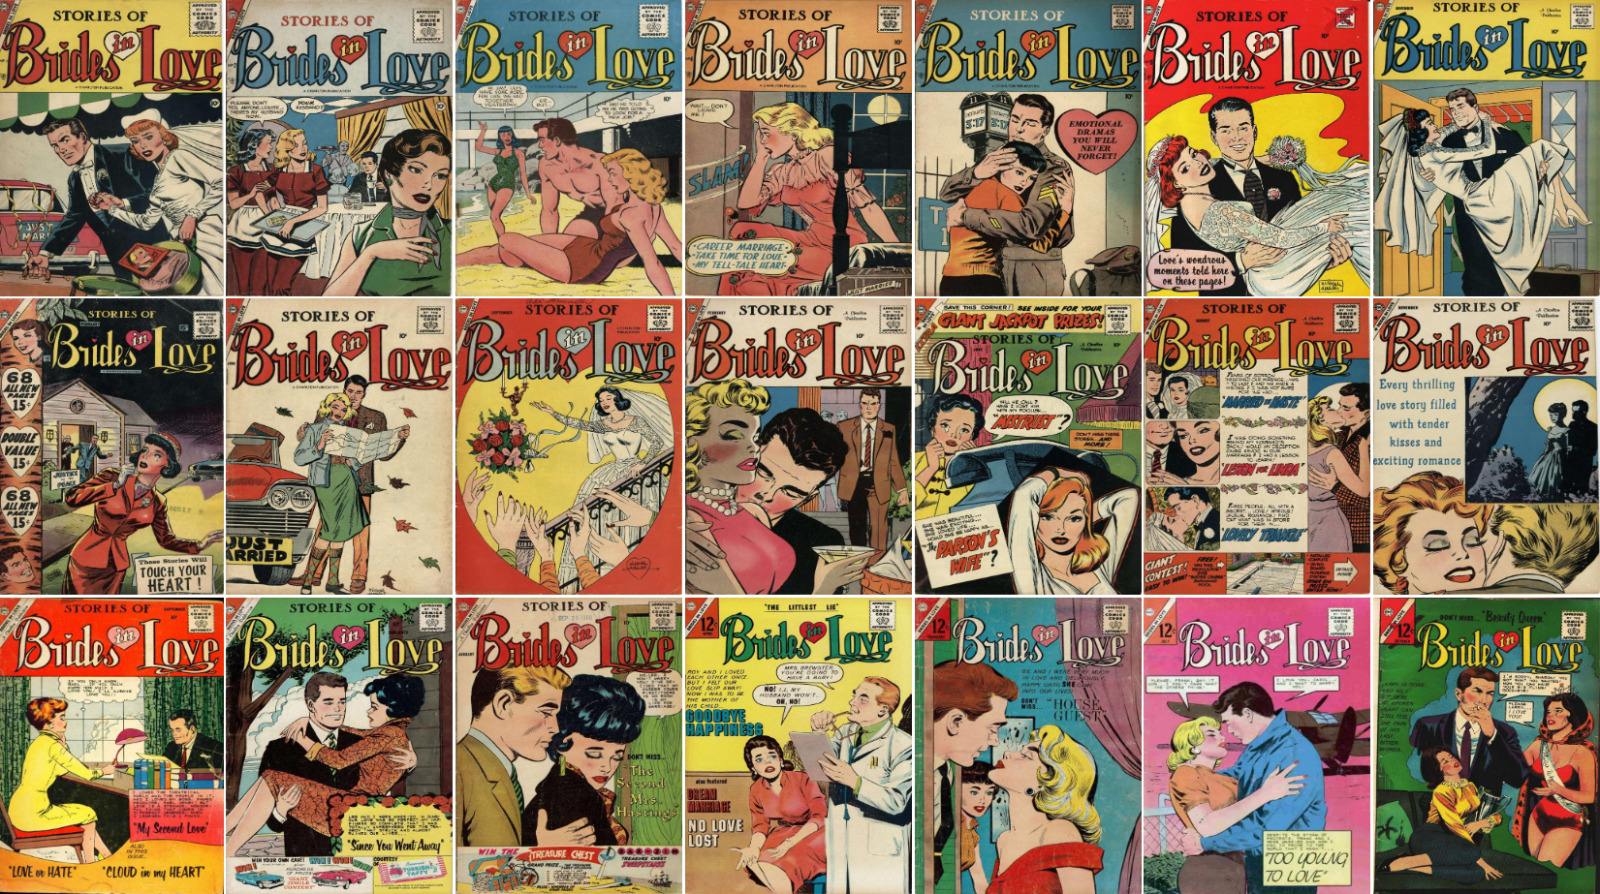 1956 - 1964 Brides in Love Comic Book Package - 21 eBooks on CD